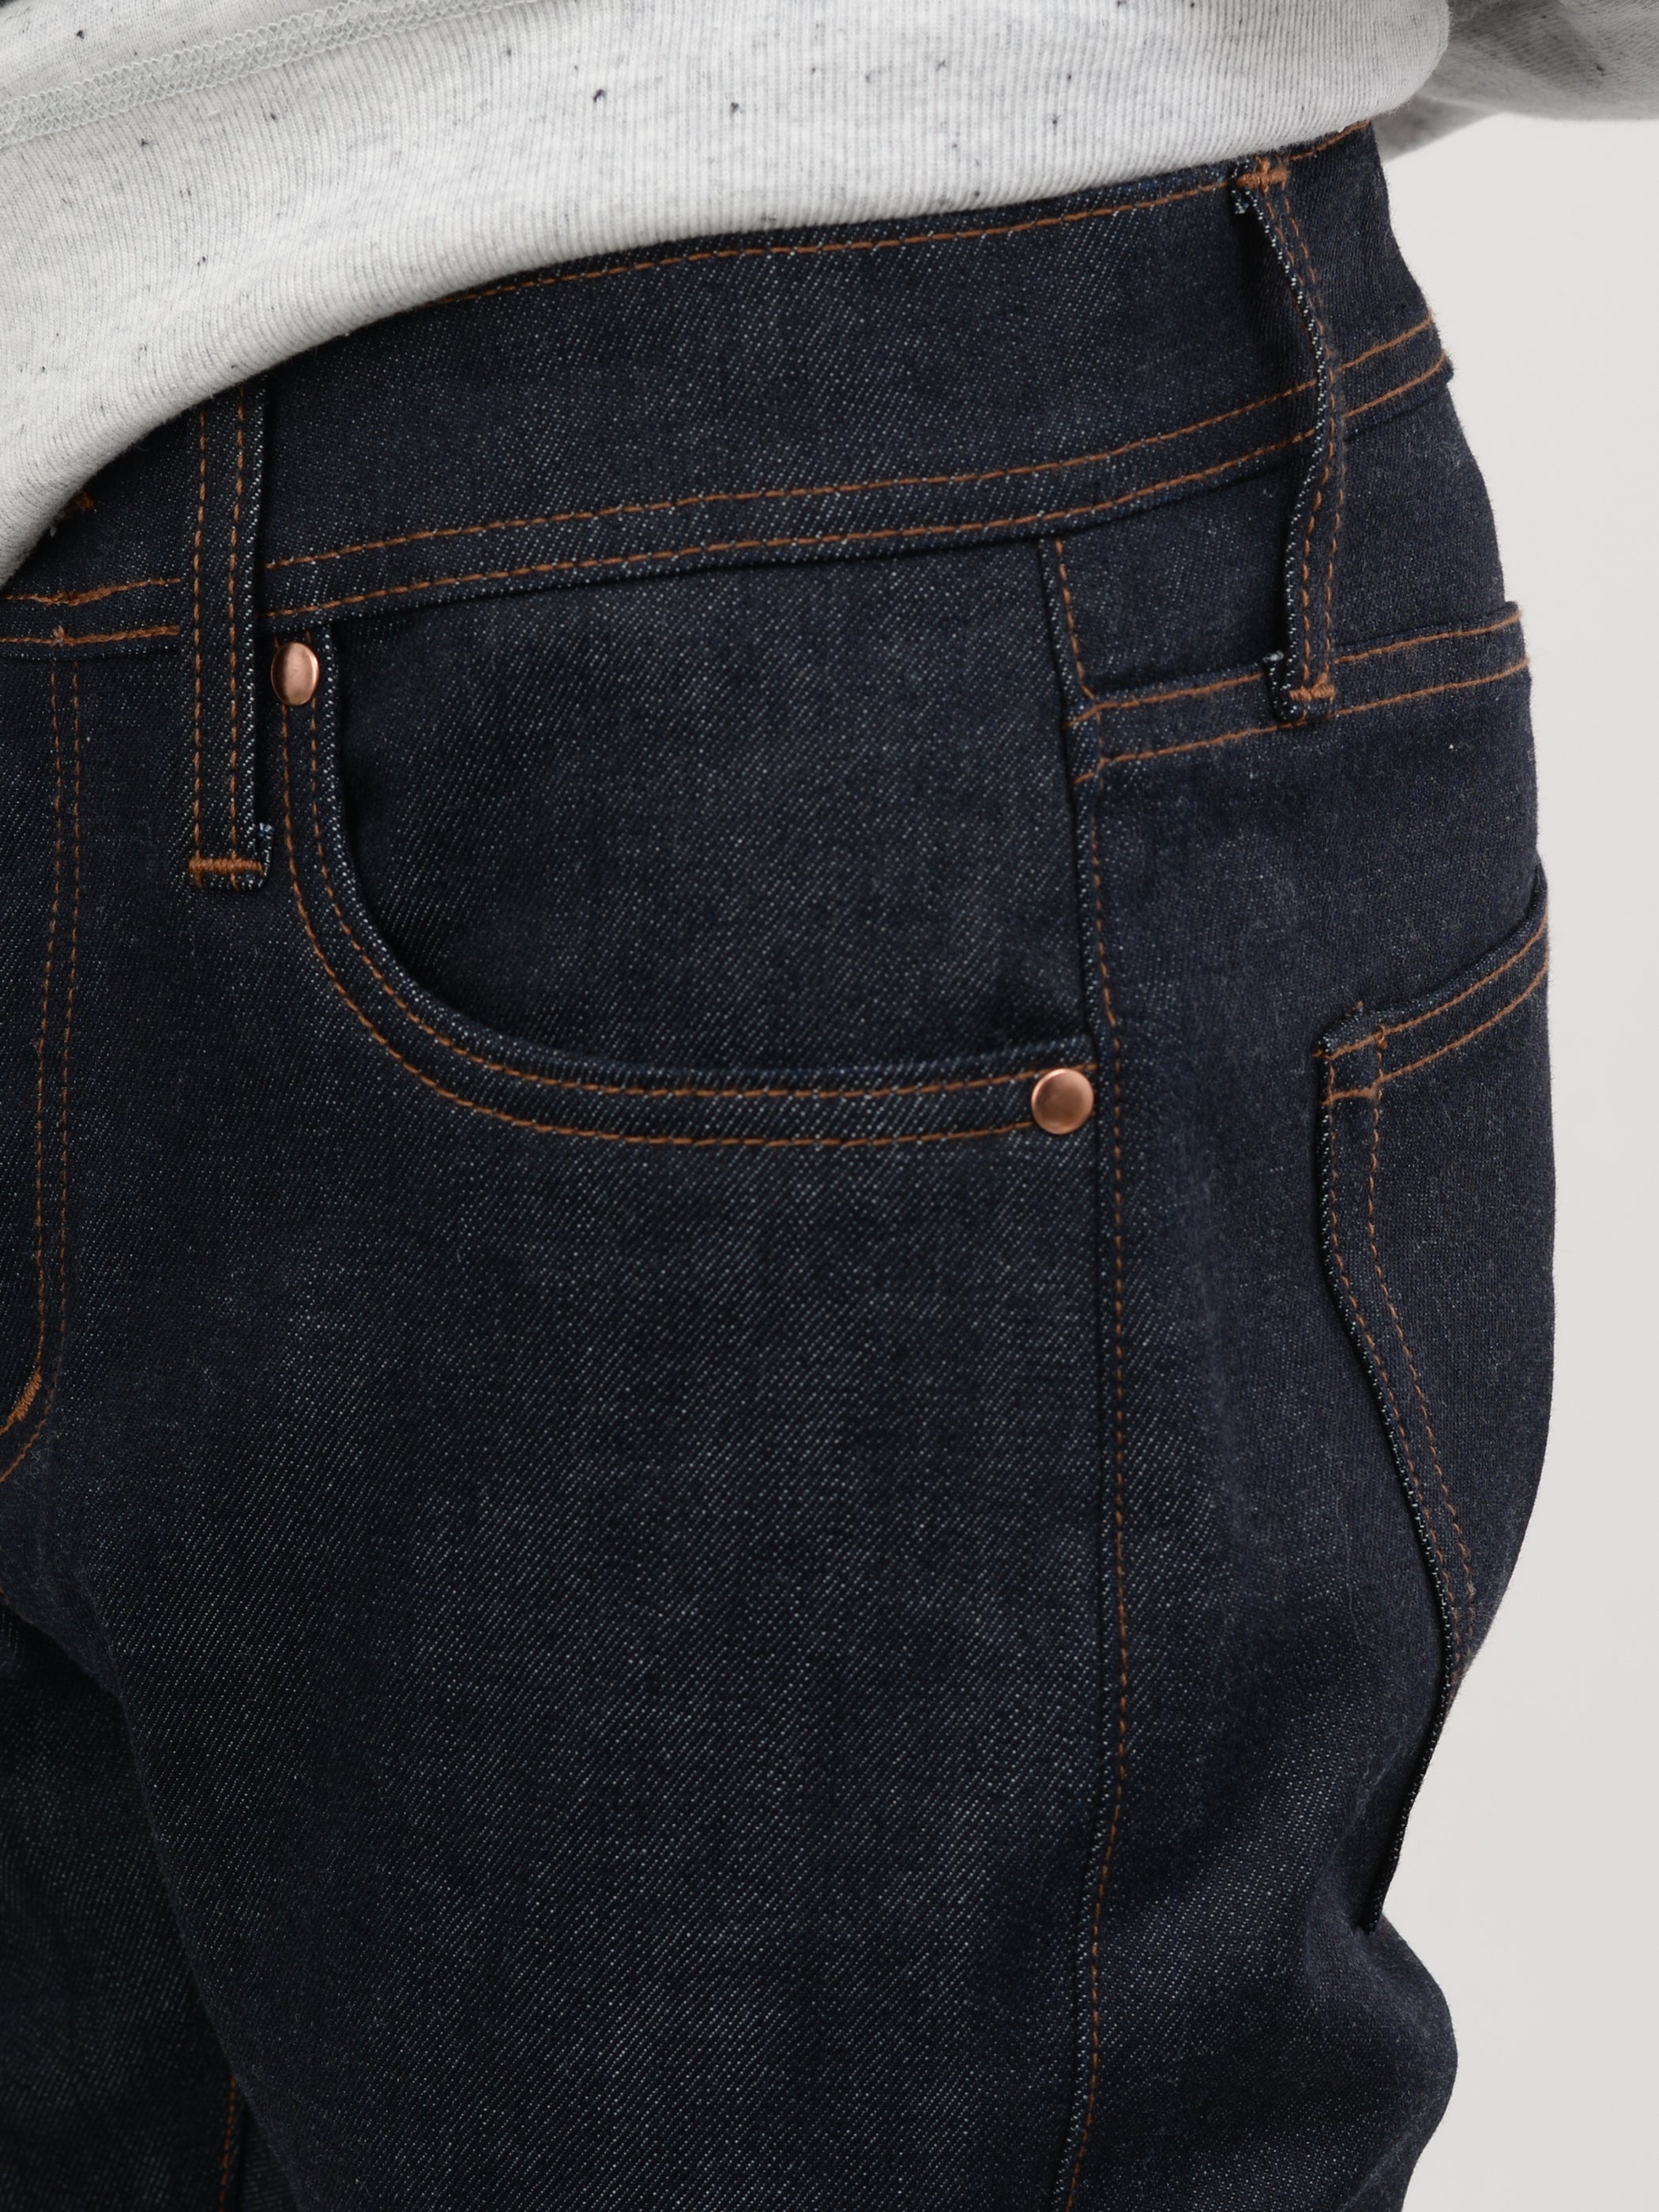 The Unbranded Brand UB322 Straight Selvedge — Byron & Barclay